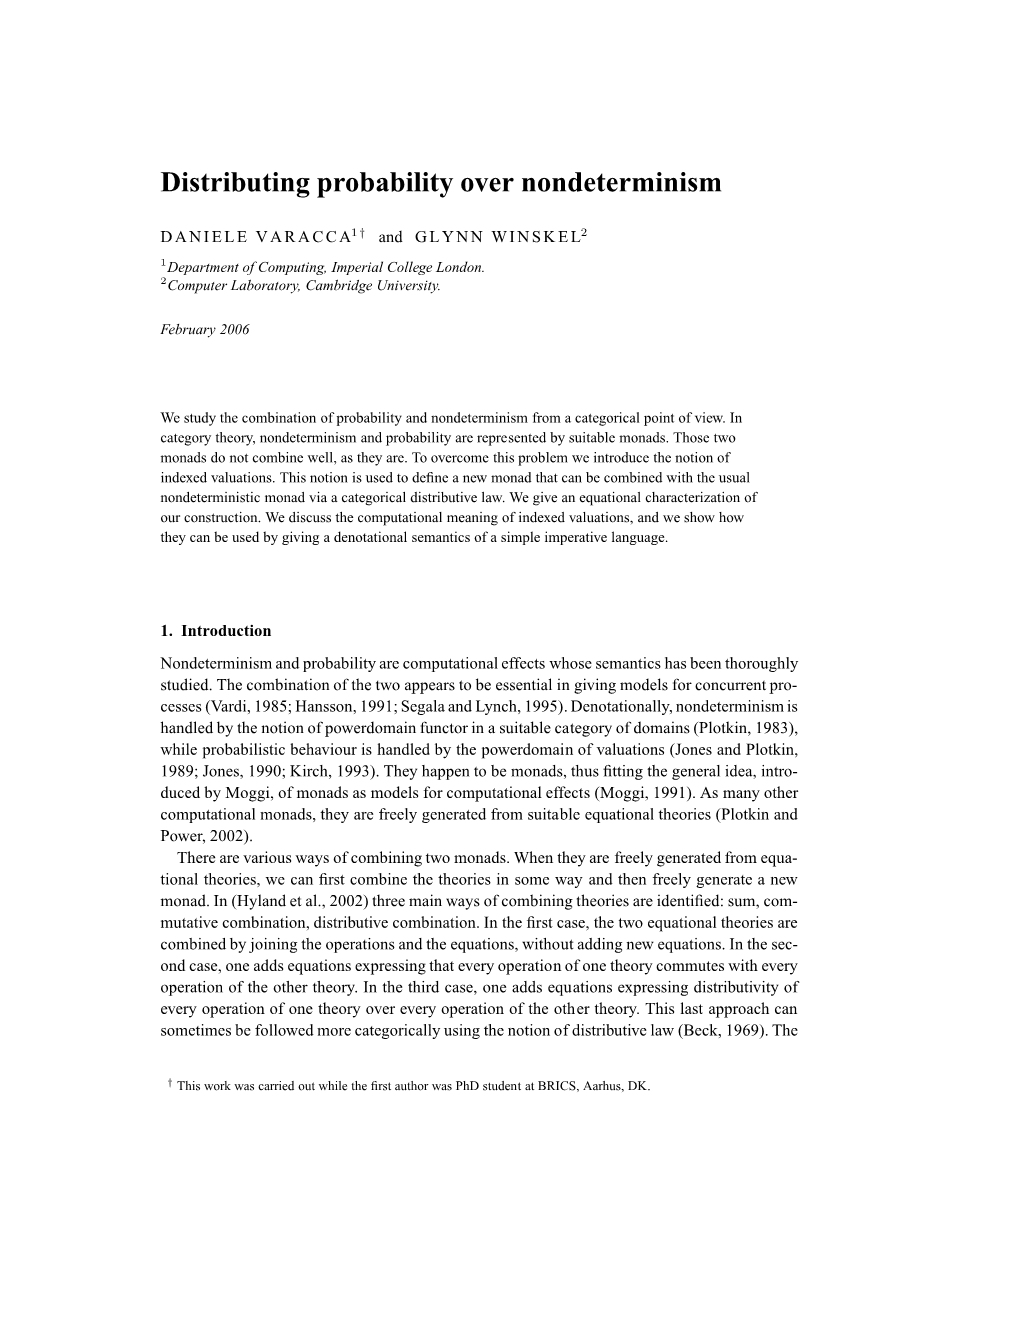 Distributing Probability Over Nondeterminism